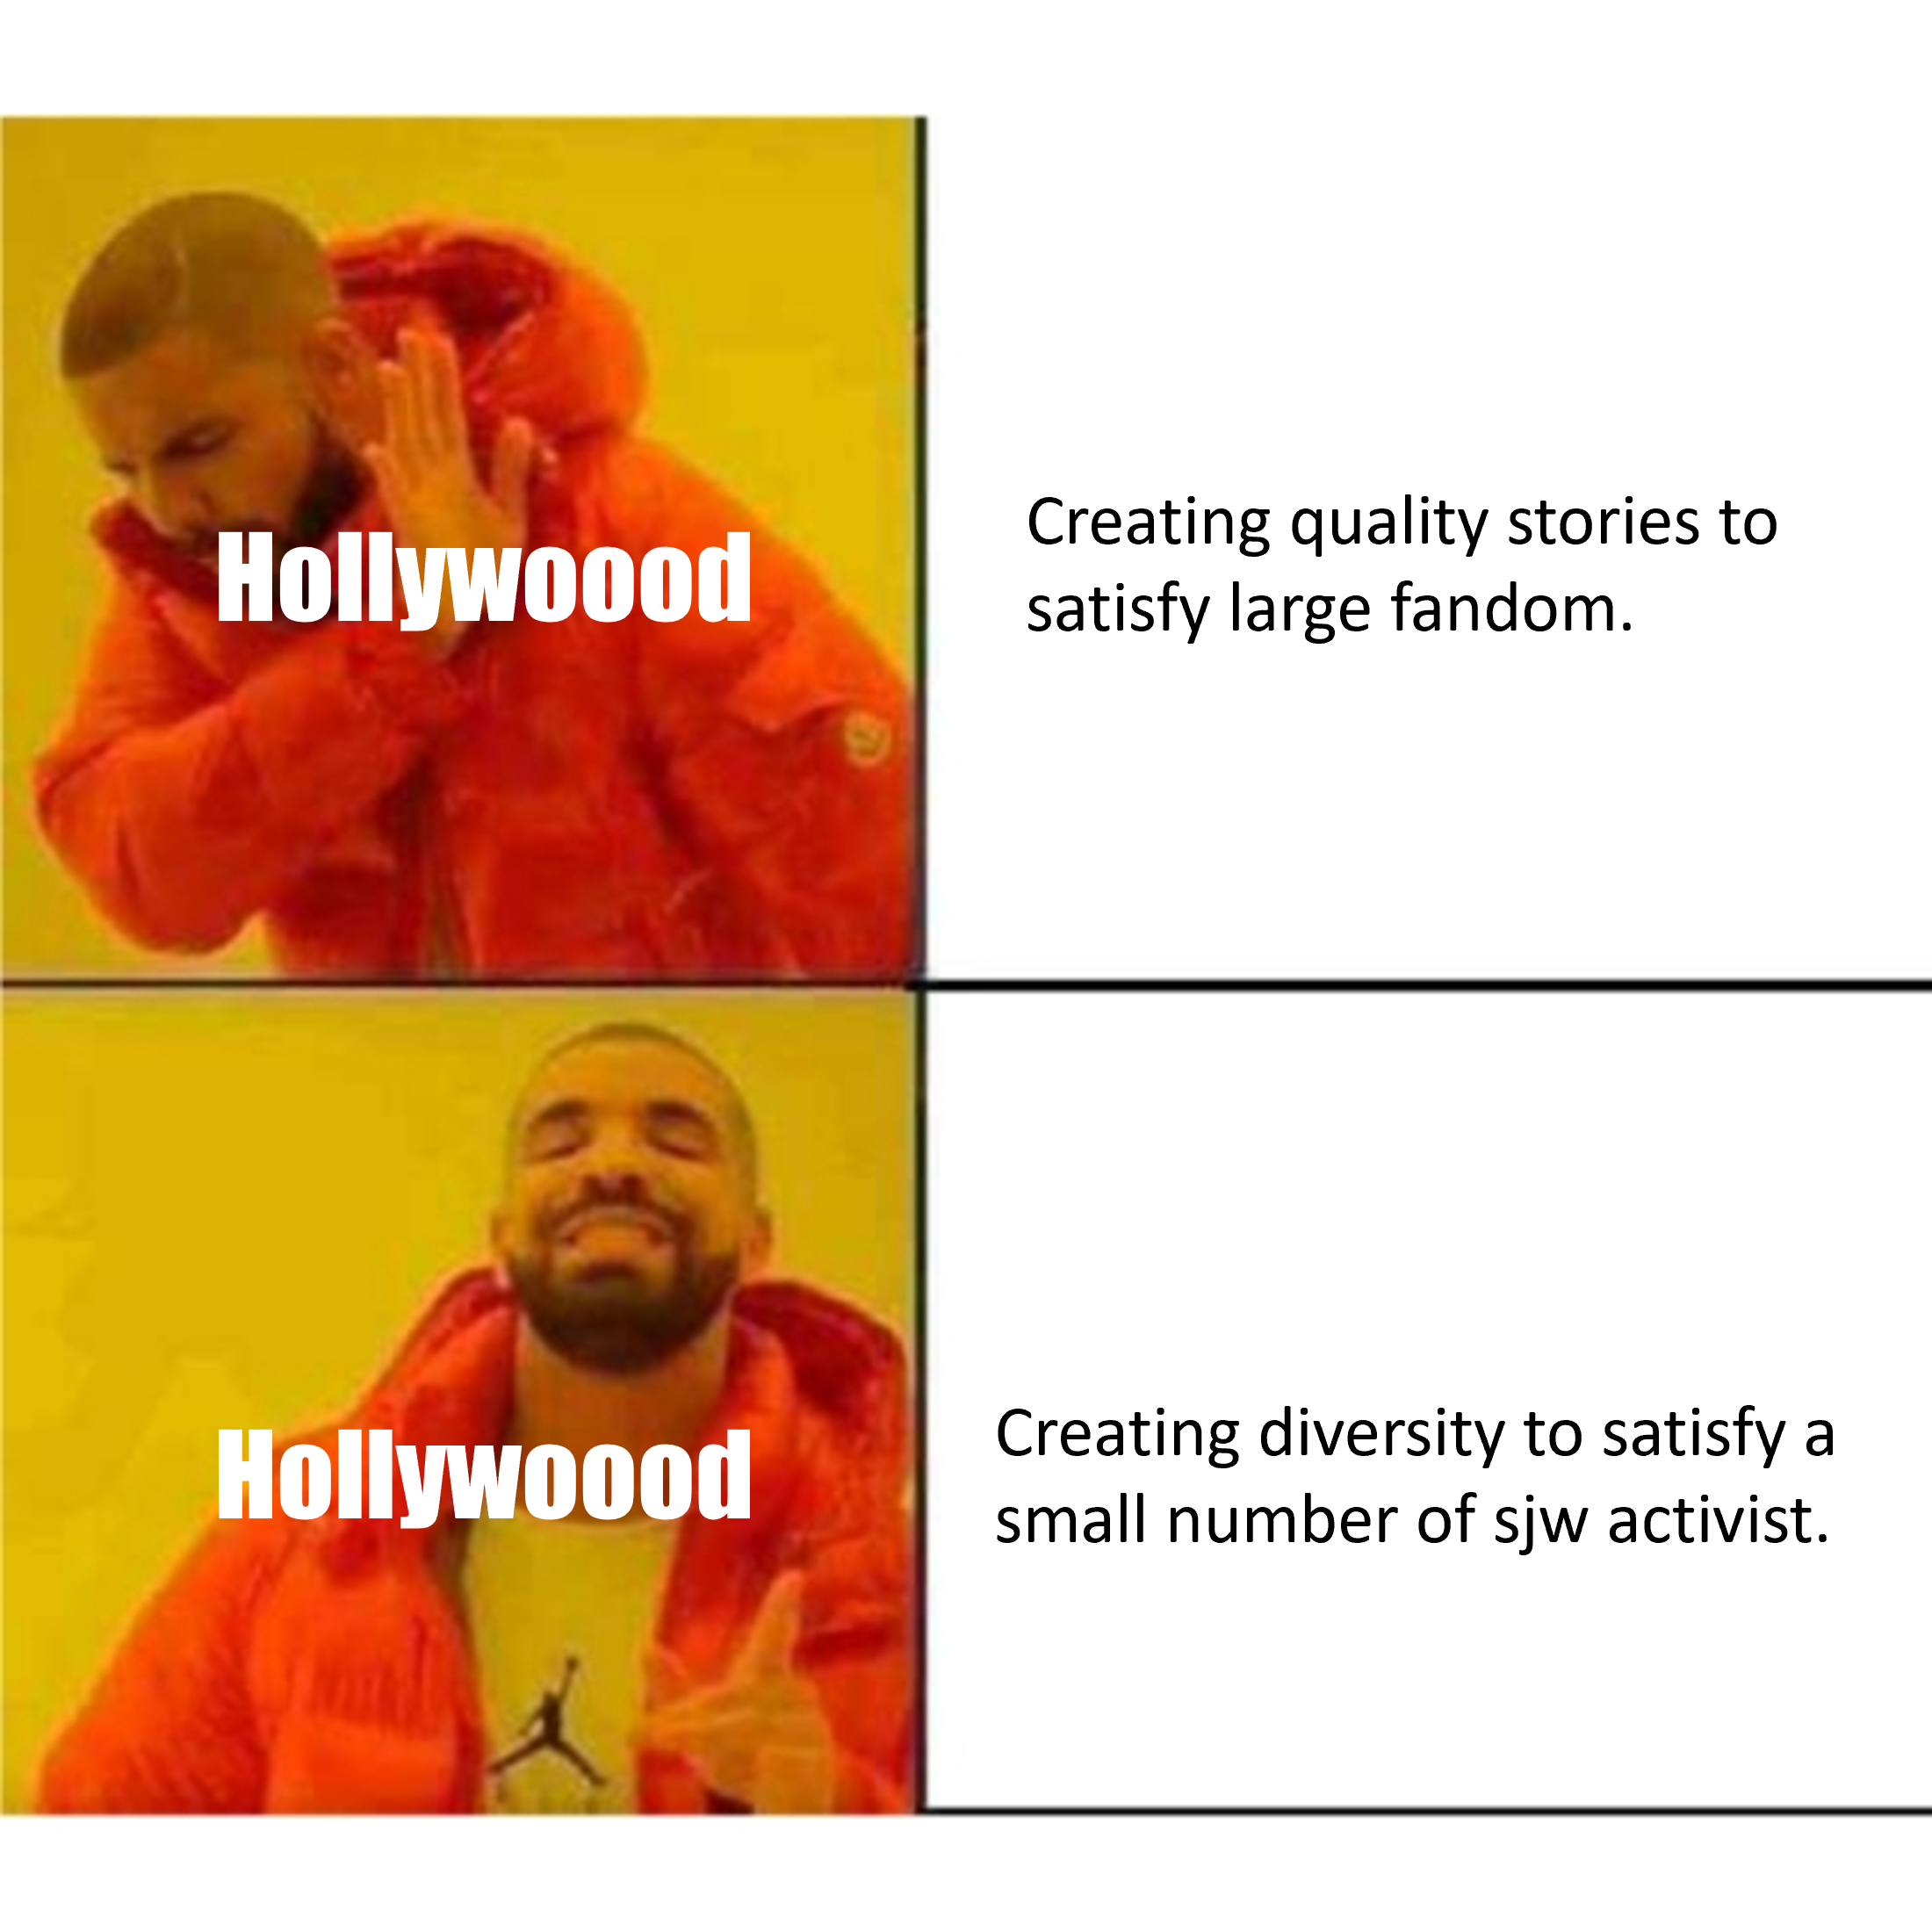 US entertainment industry now